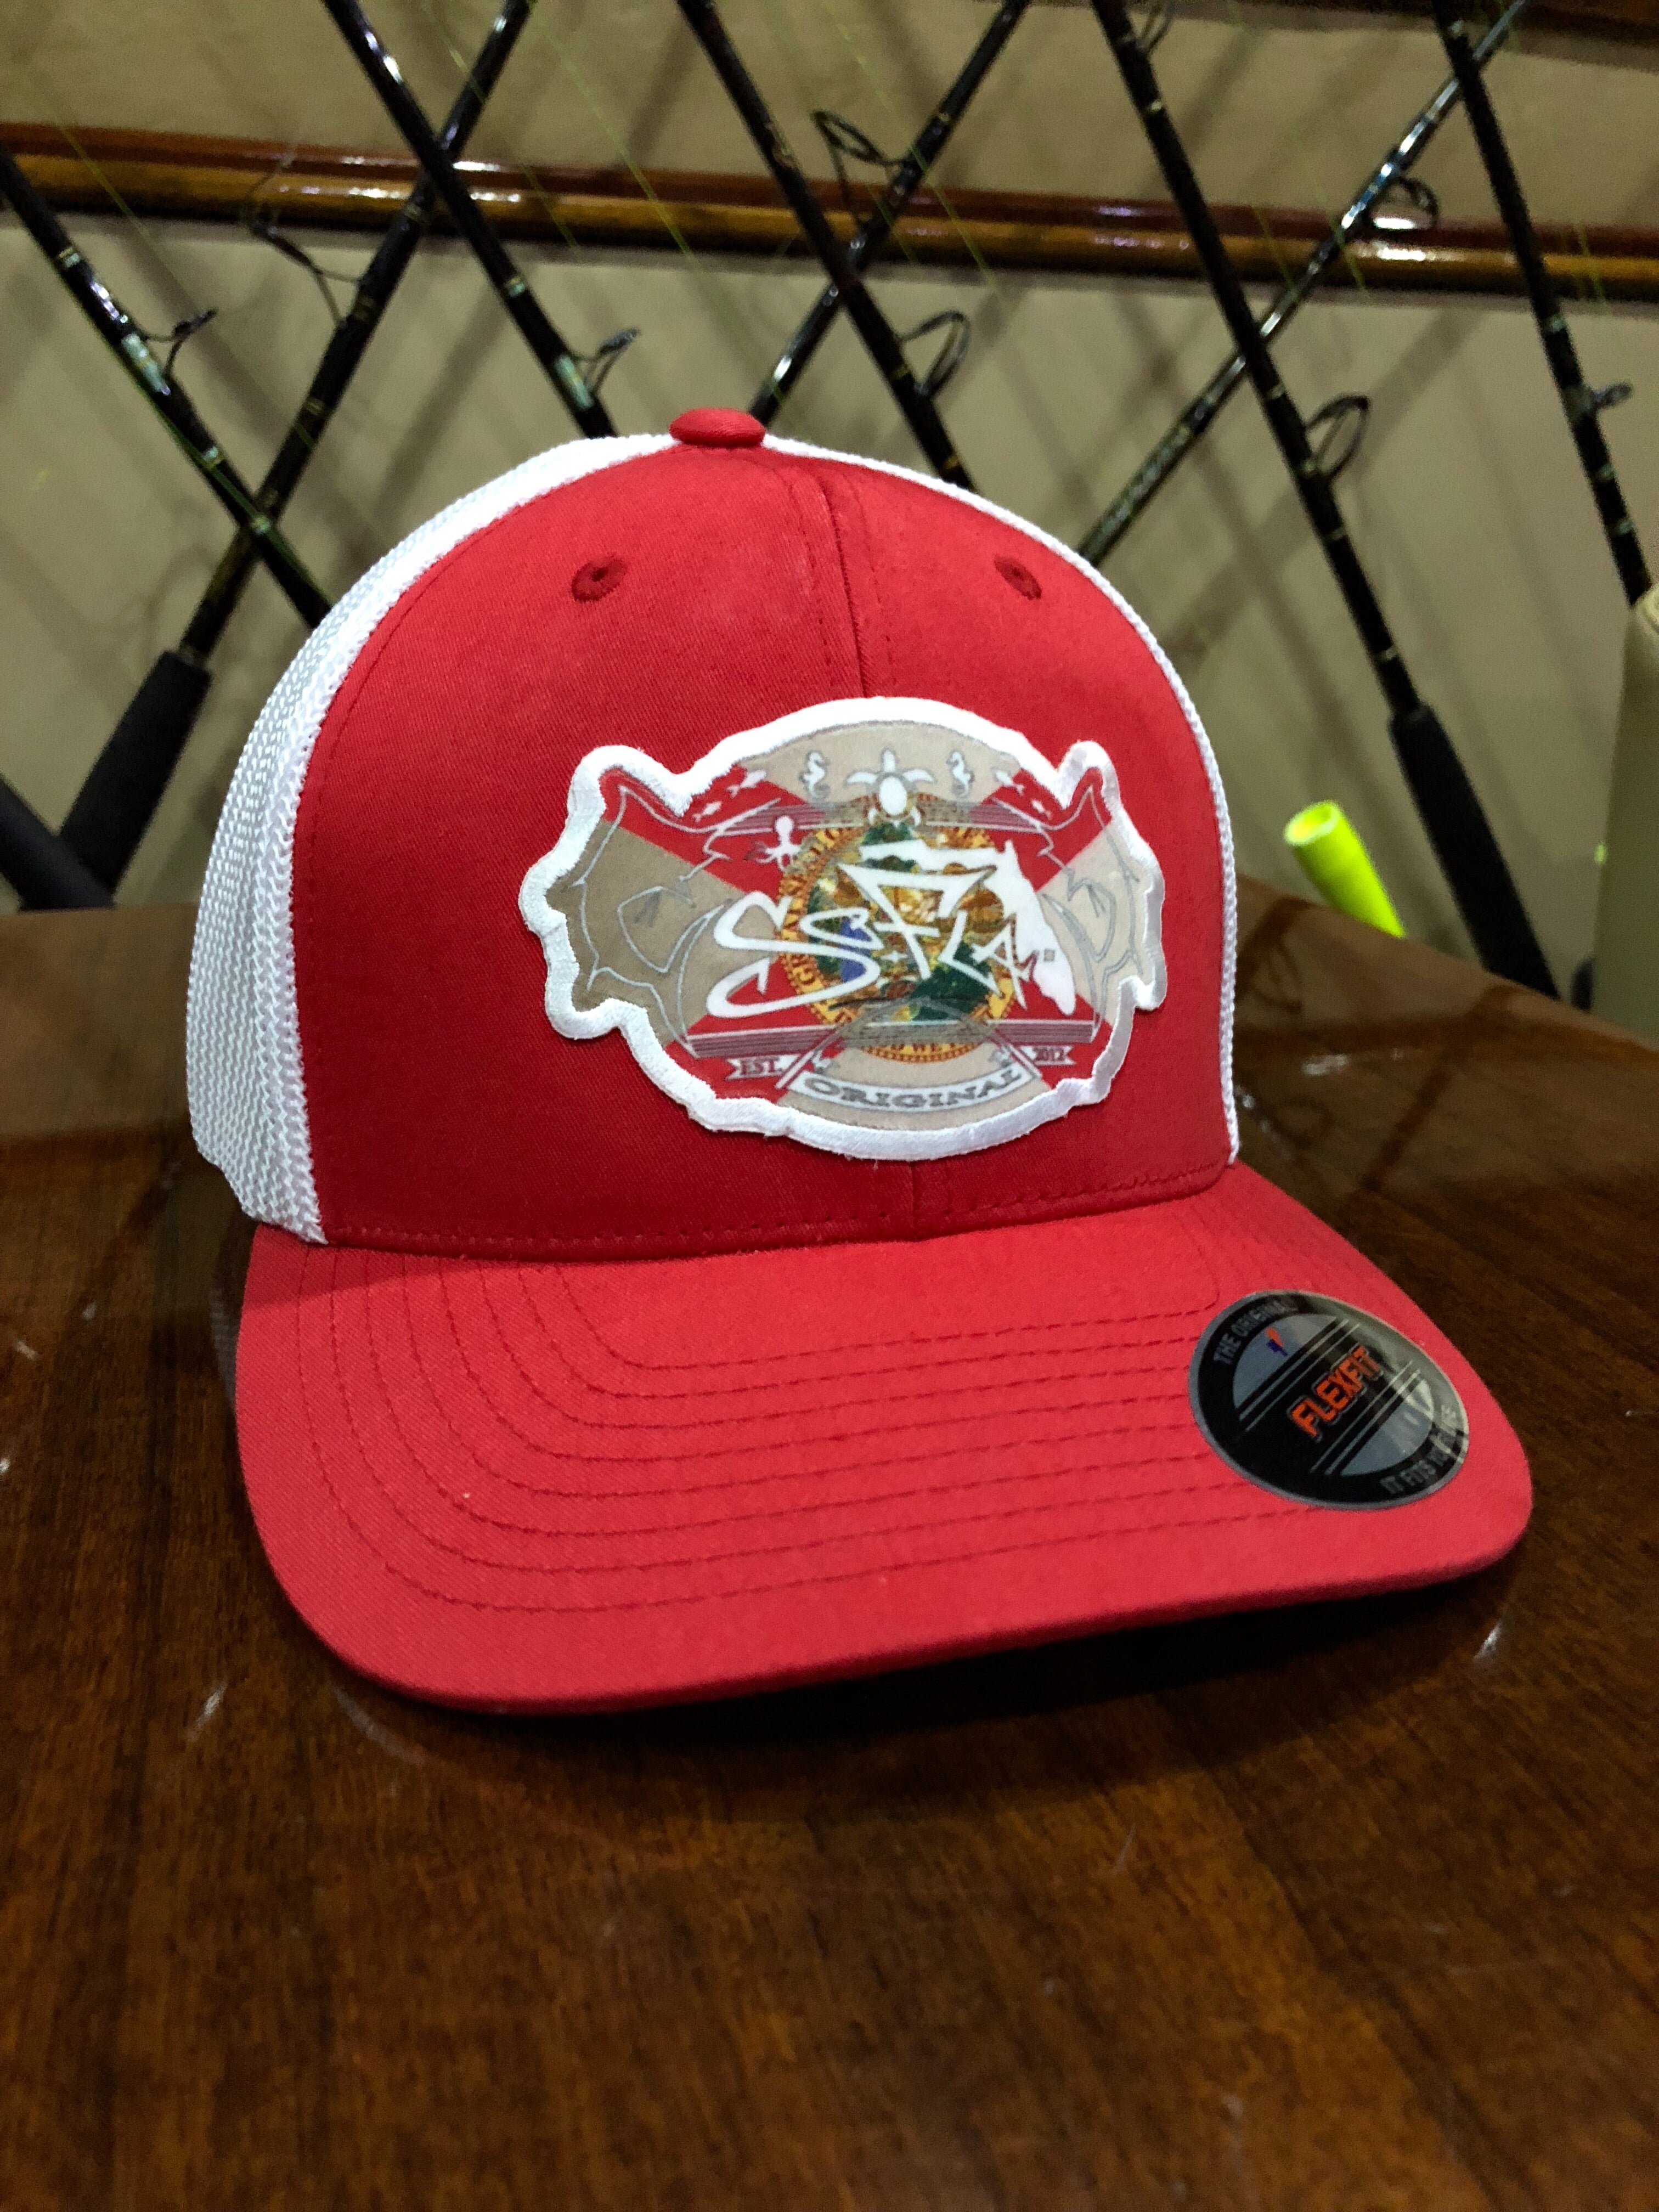 Red and White Sunwear flex So-Fla – Heritage trucker fit